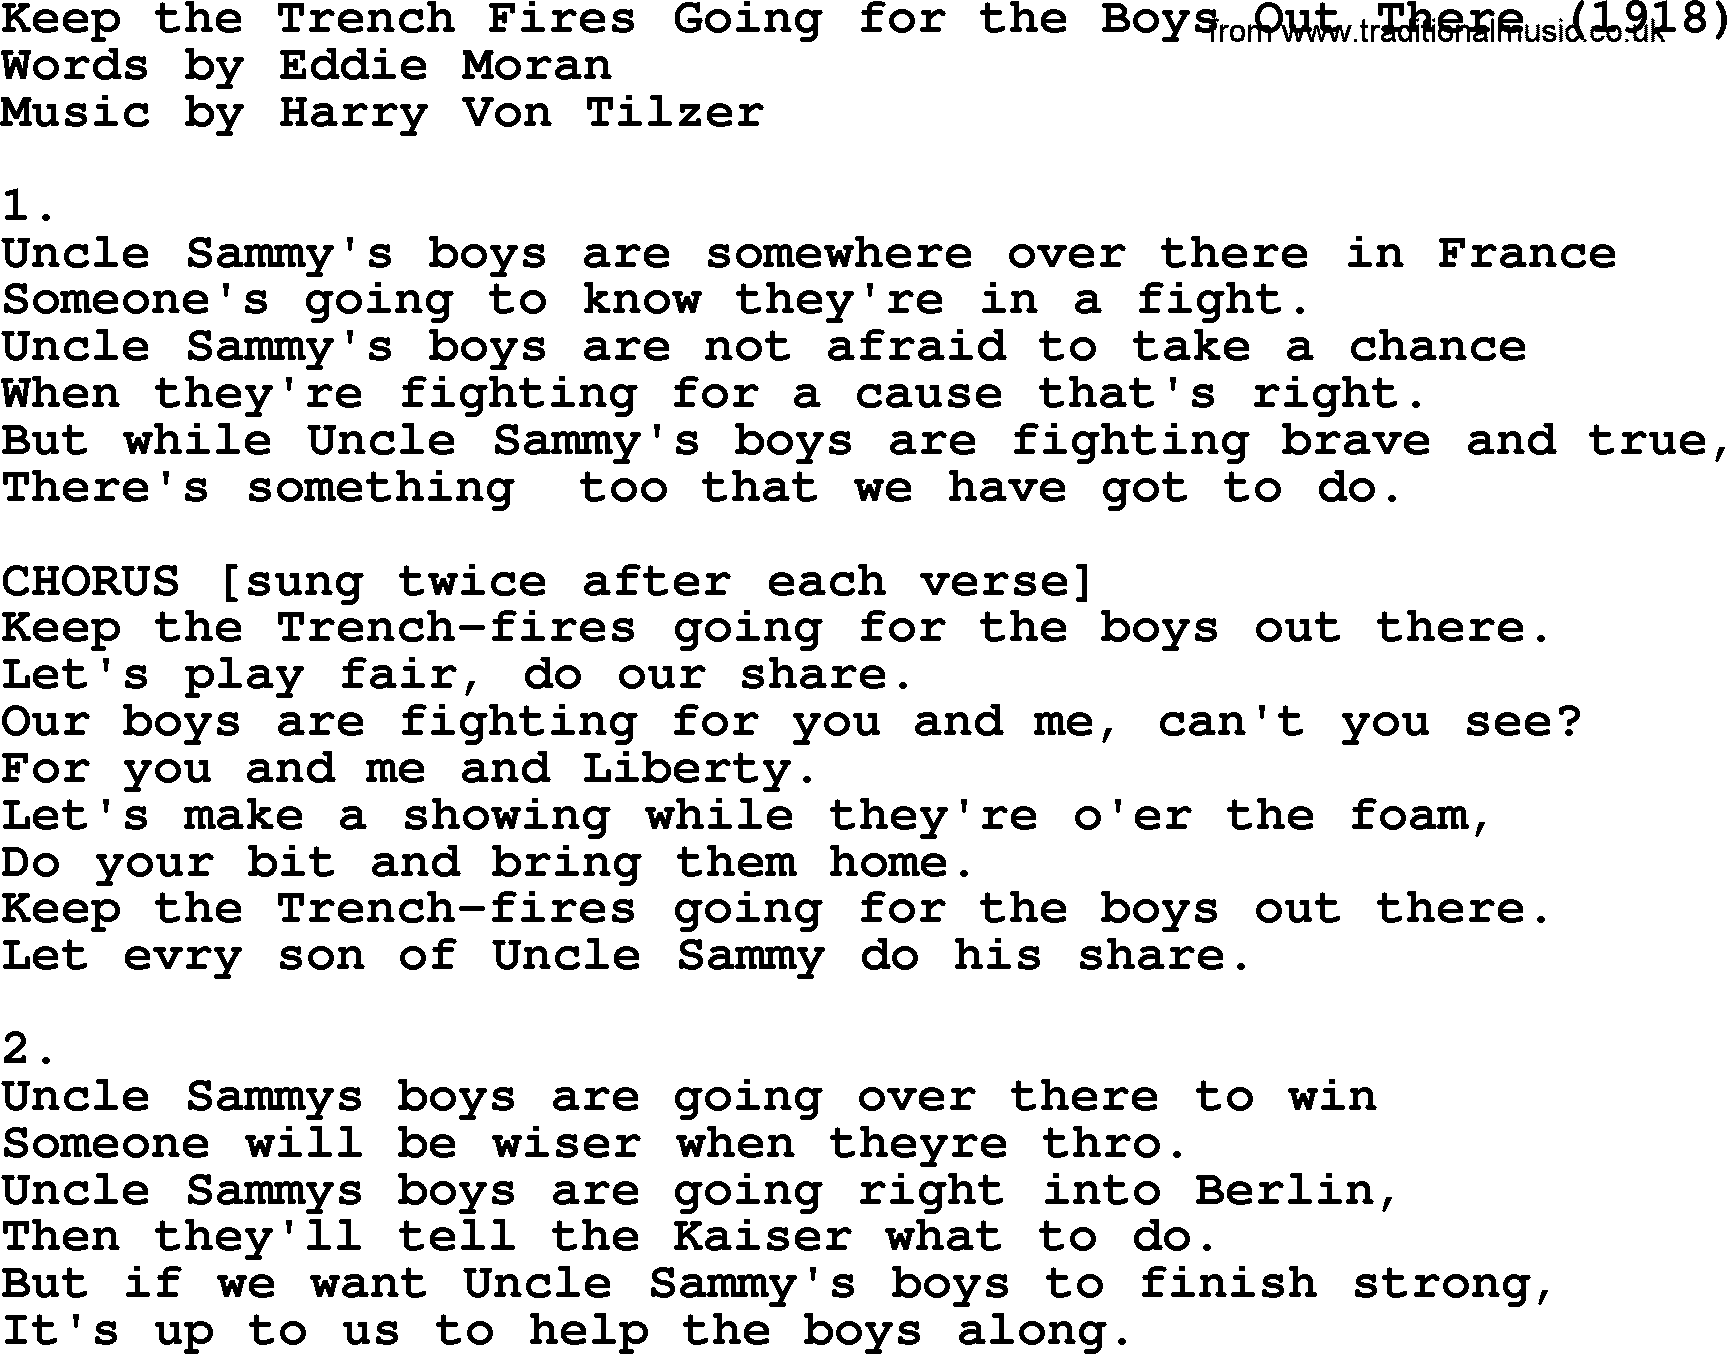 World War(WW1) One Song: Keep The Trench Fires Going For The Boys Out There 1918, lyrics and PDF